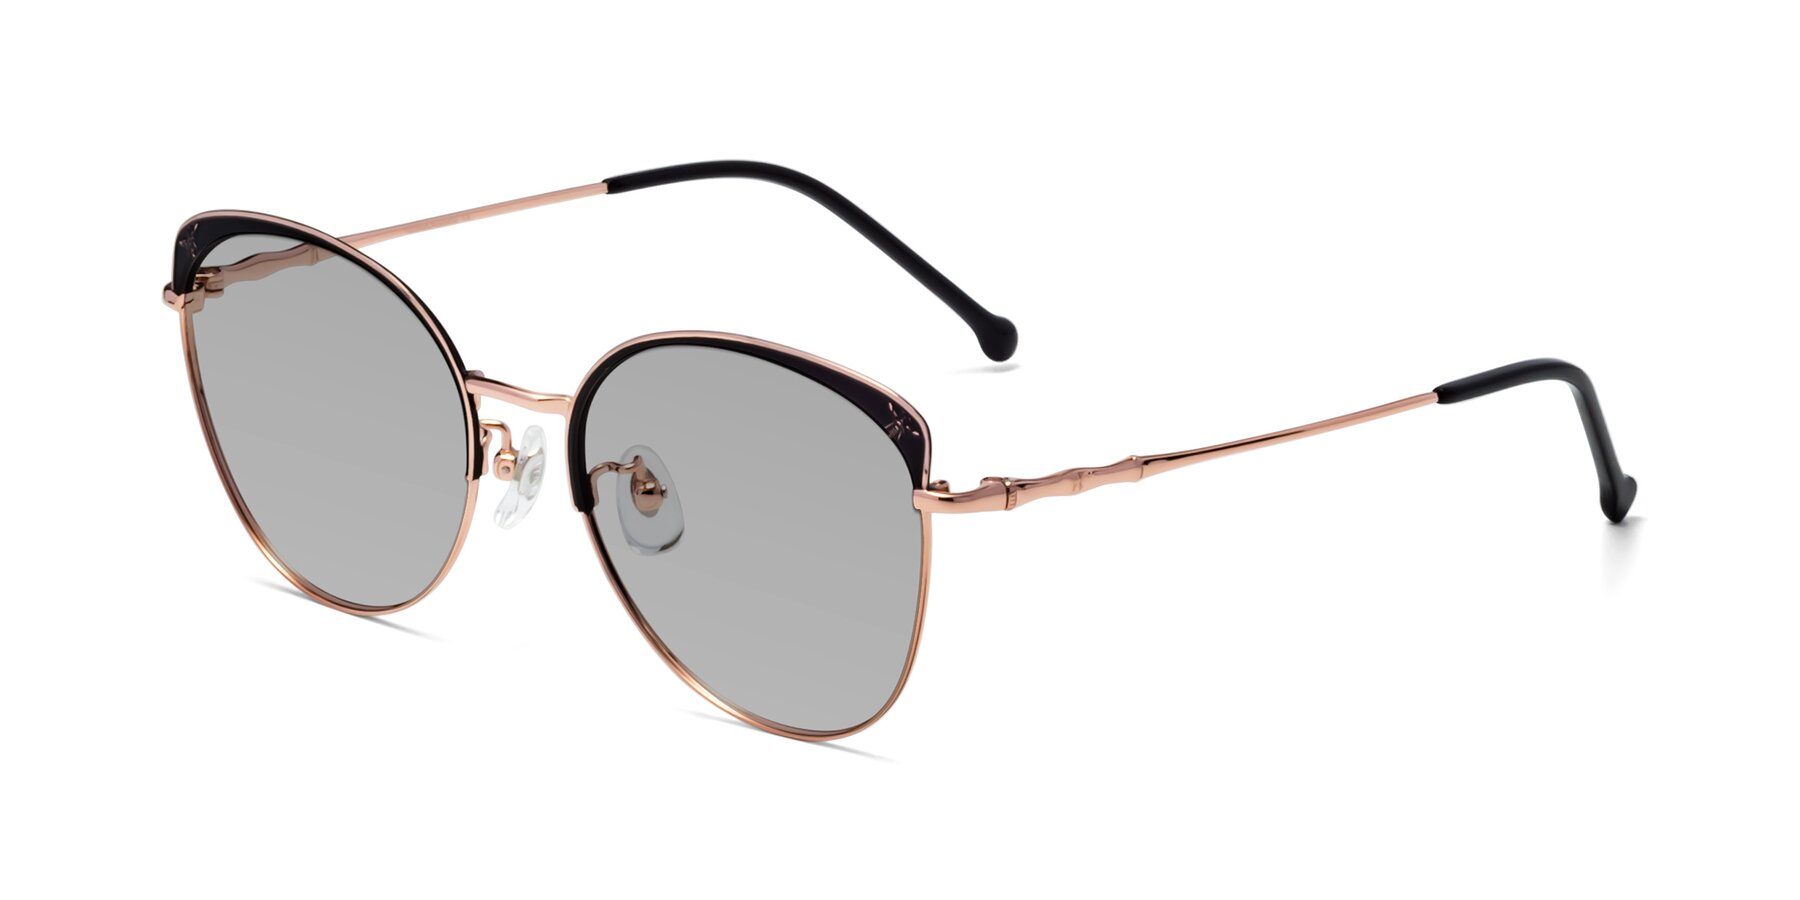 Angle of 18019 in Black-Rose Gold with Light Gray Tinted Lenses